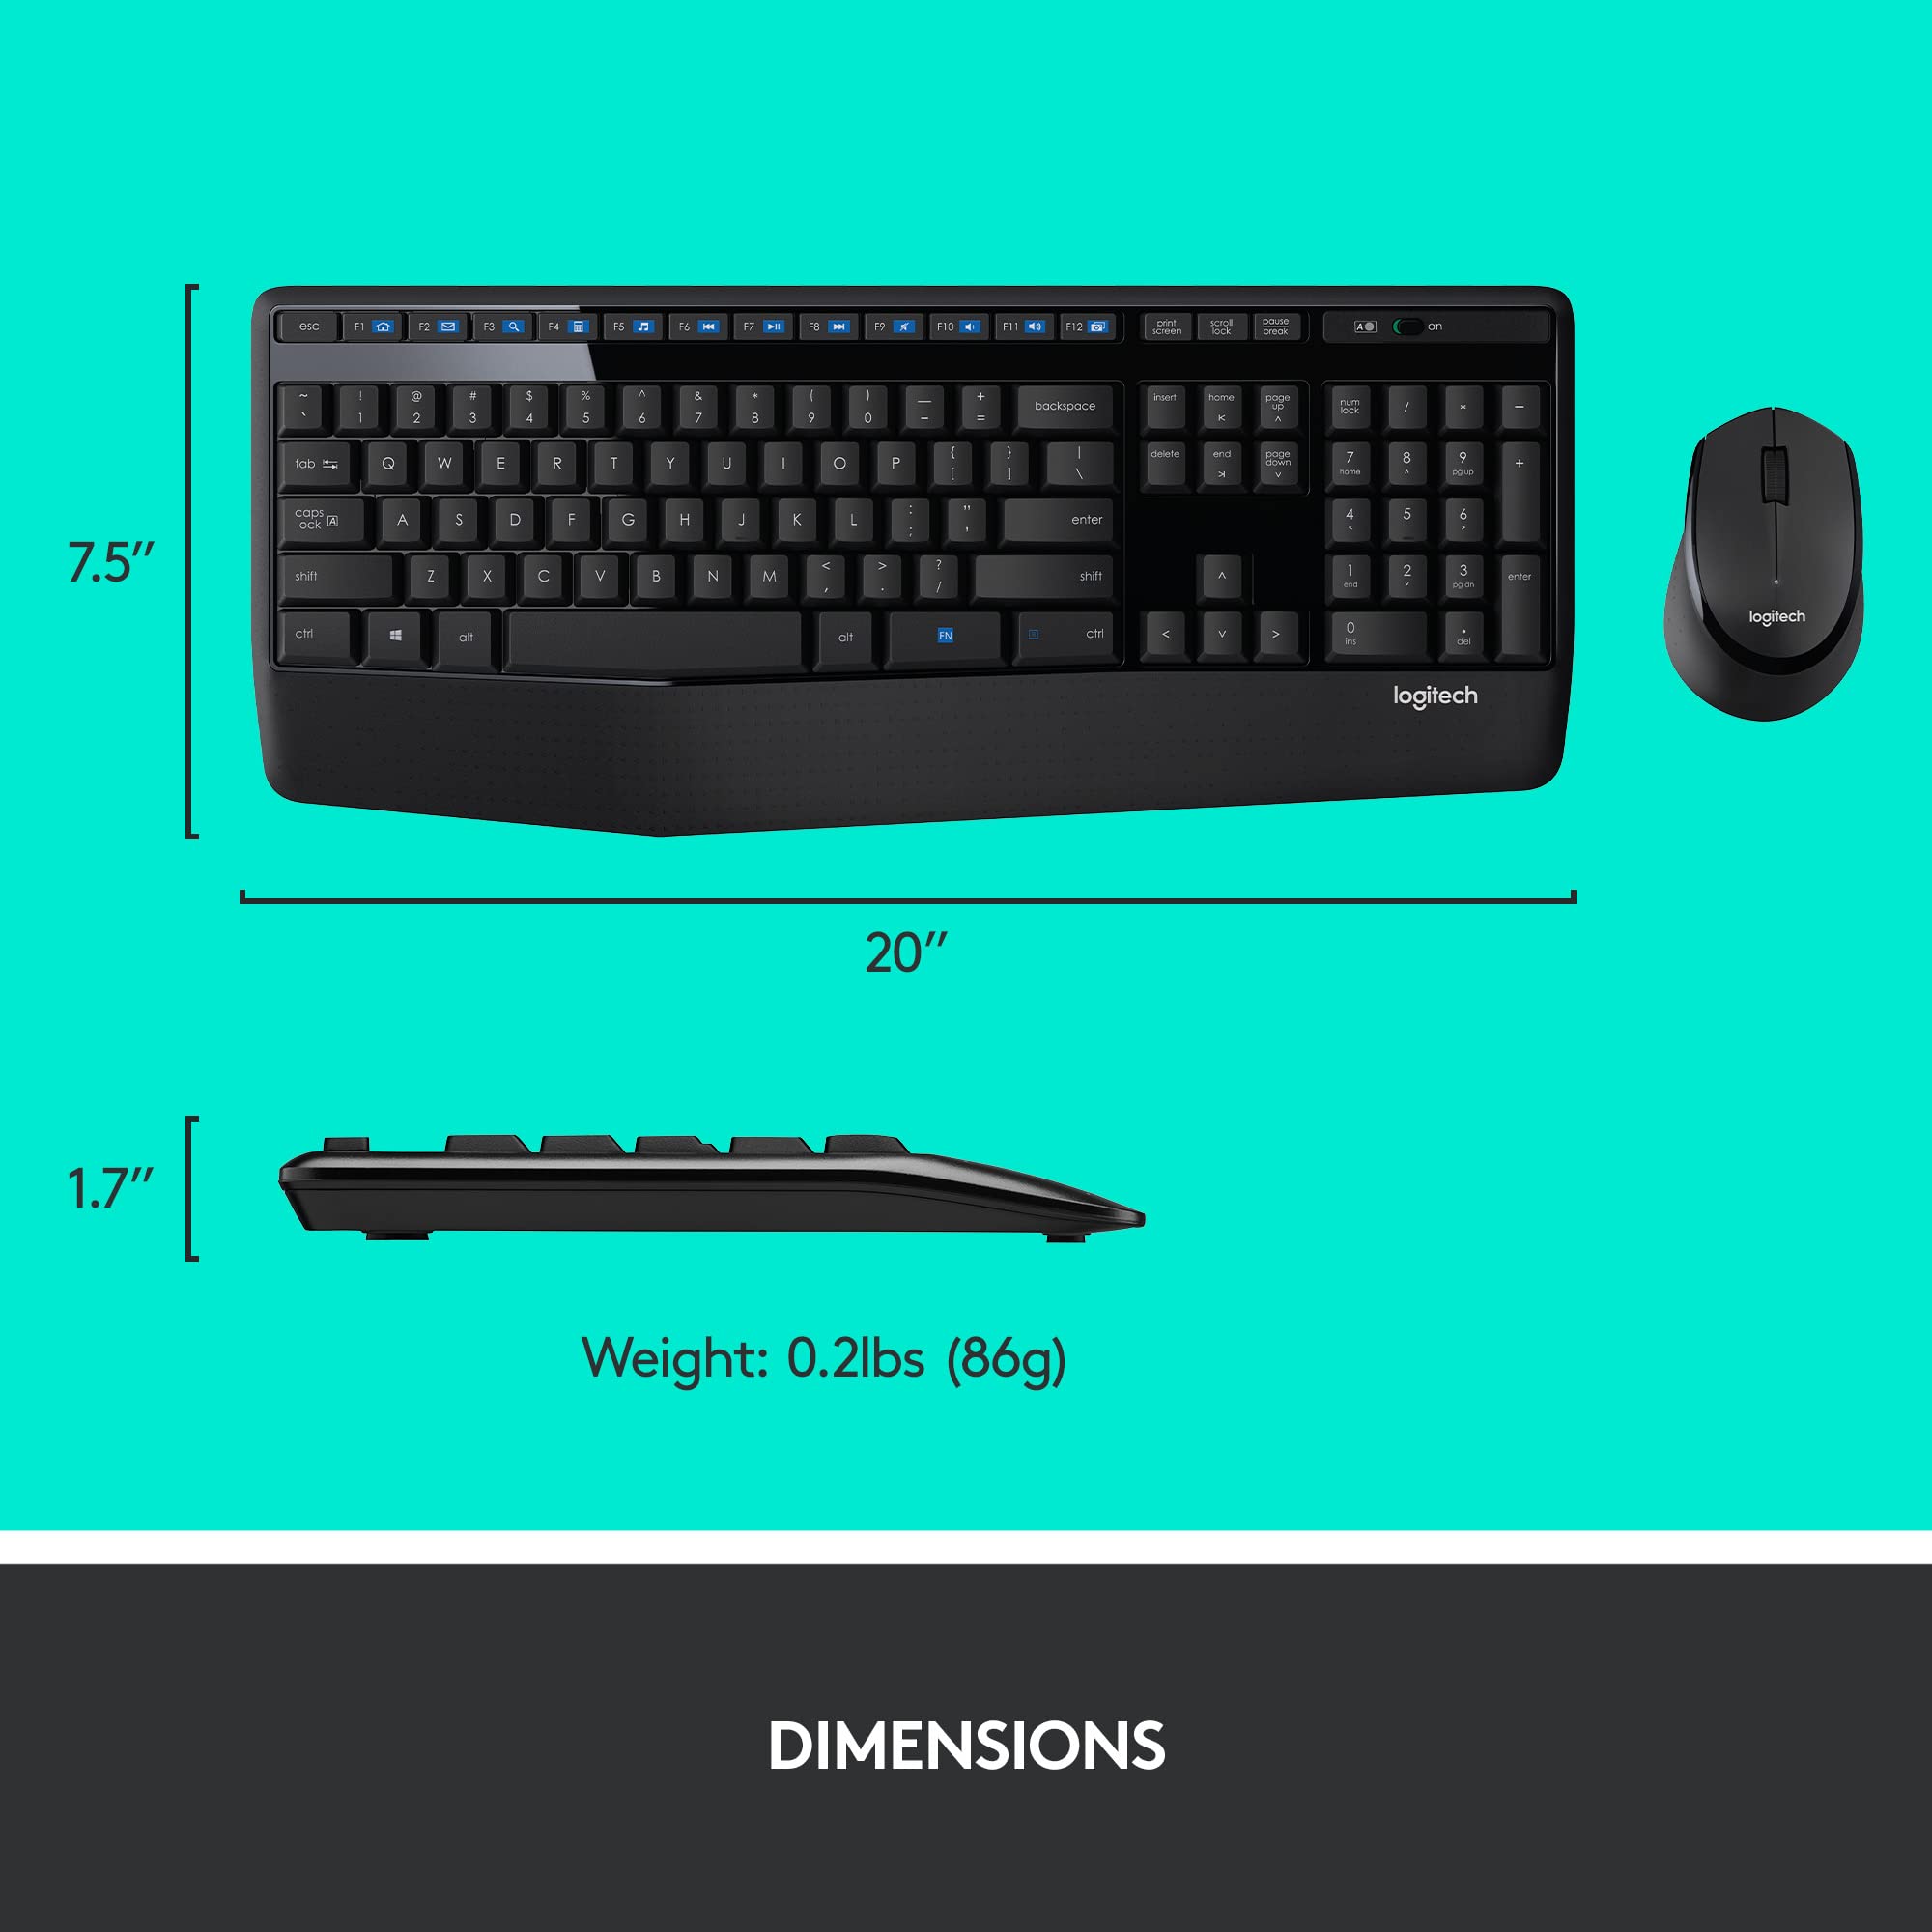 Logitech MK345 Wireless Combo Full-Sized Keyboard with Palm Rest and Comfortable Right-Handed Mouse, 2.4 GHz Wireless USB Receiver, Compatible with PC, Laptop,Black